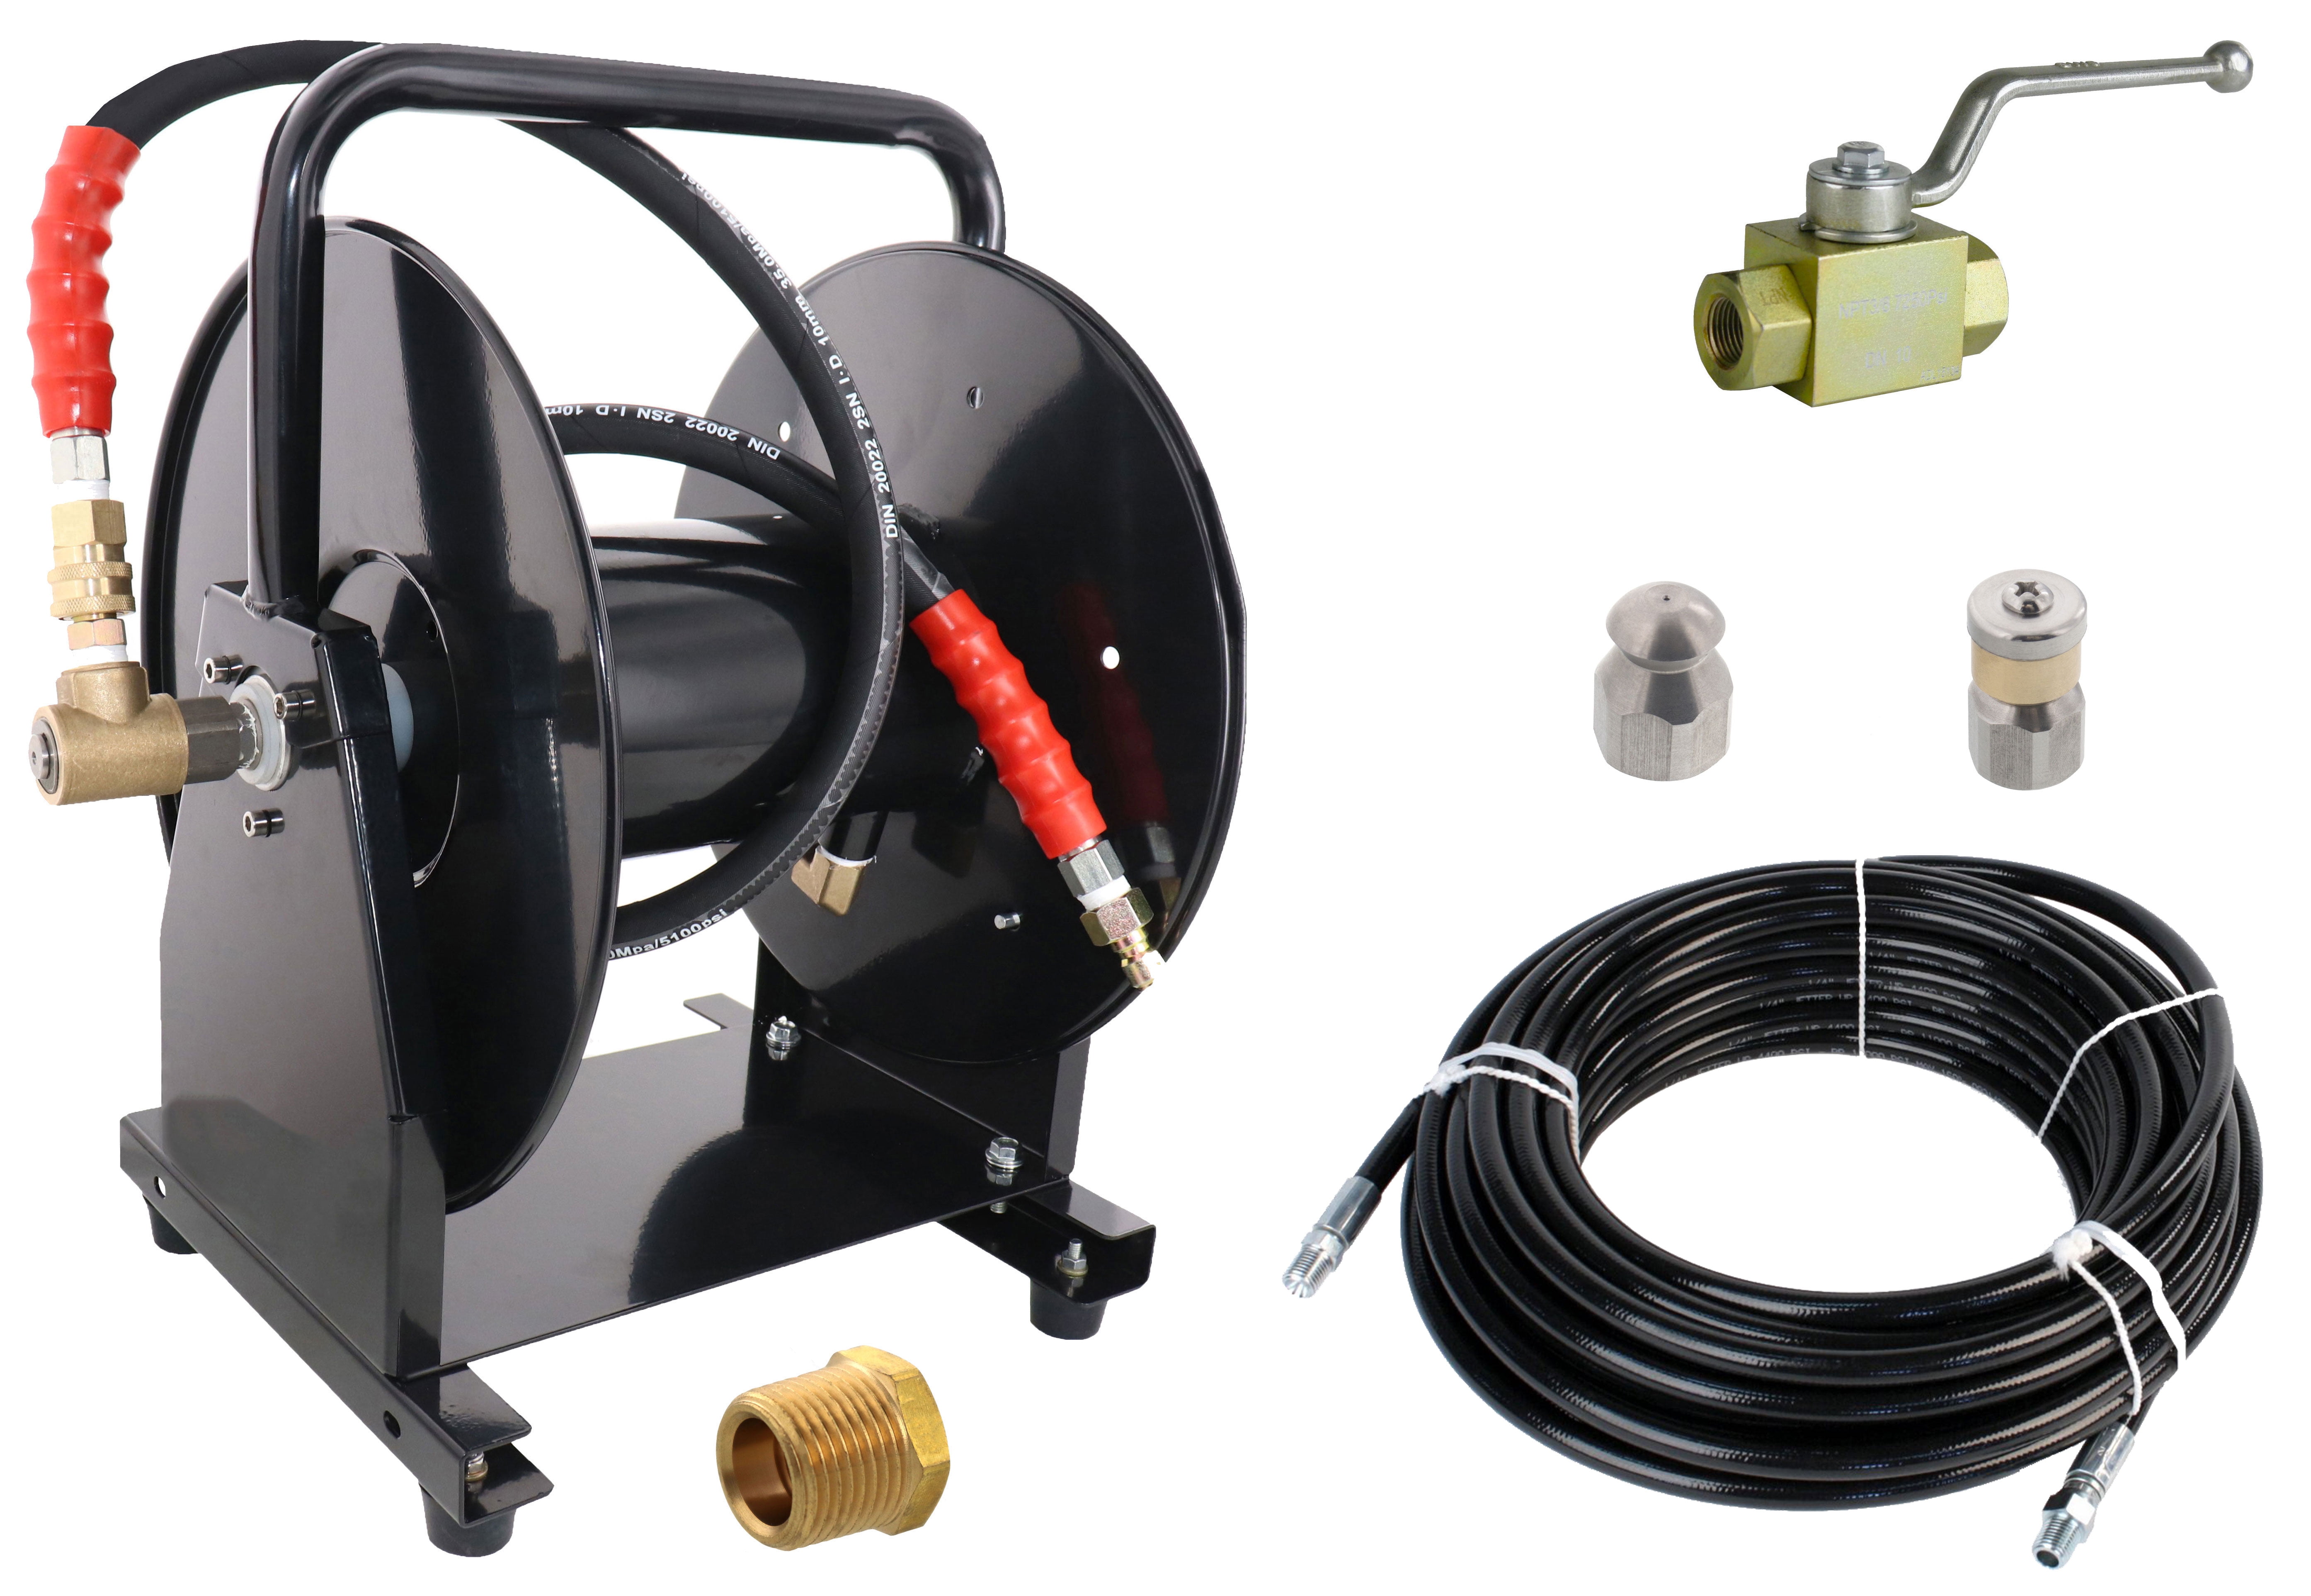 Scheiffer Sewer Jetter Kit - Ball Valve Hose Reel 1/4 x 100' Hose and  Nozzles 